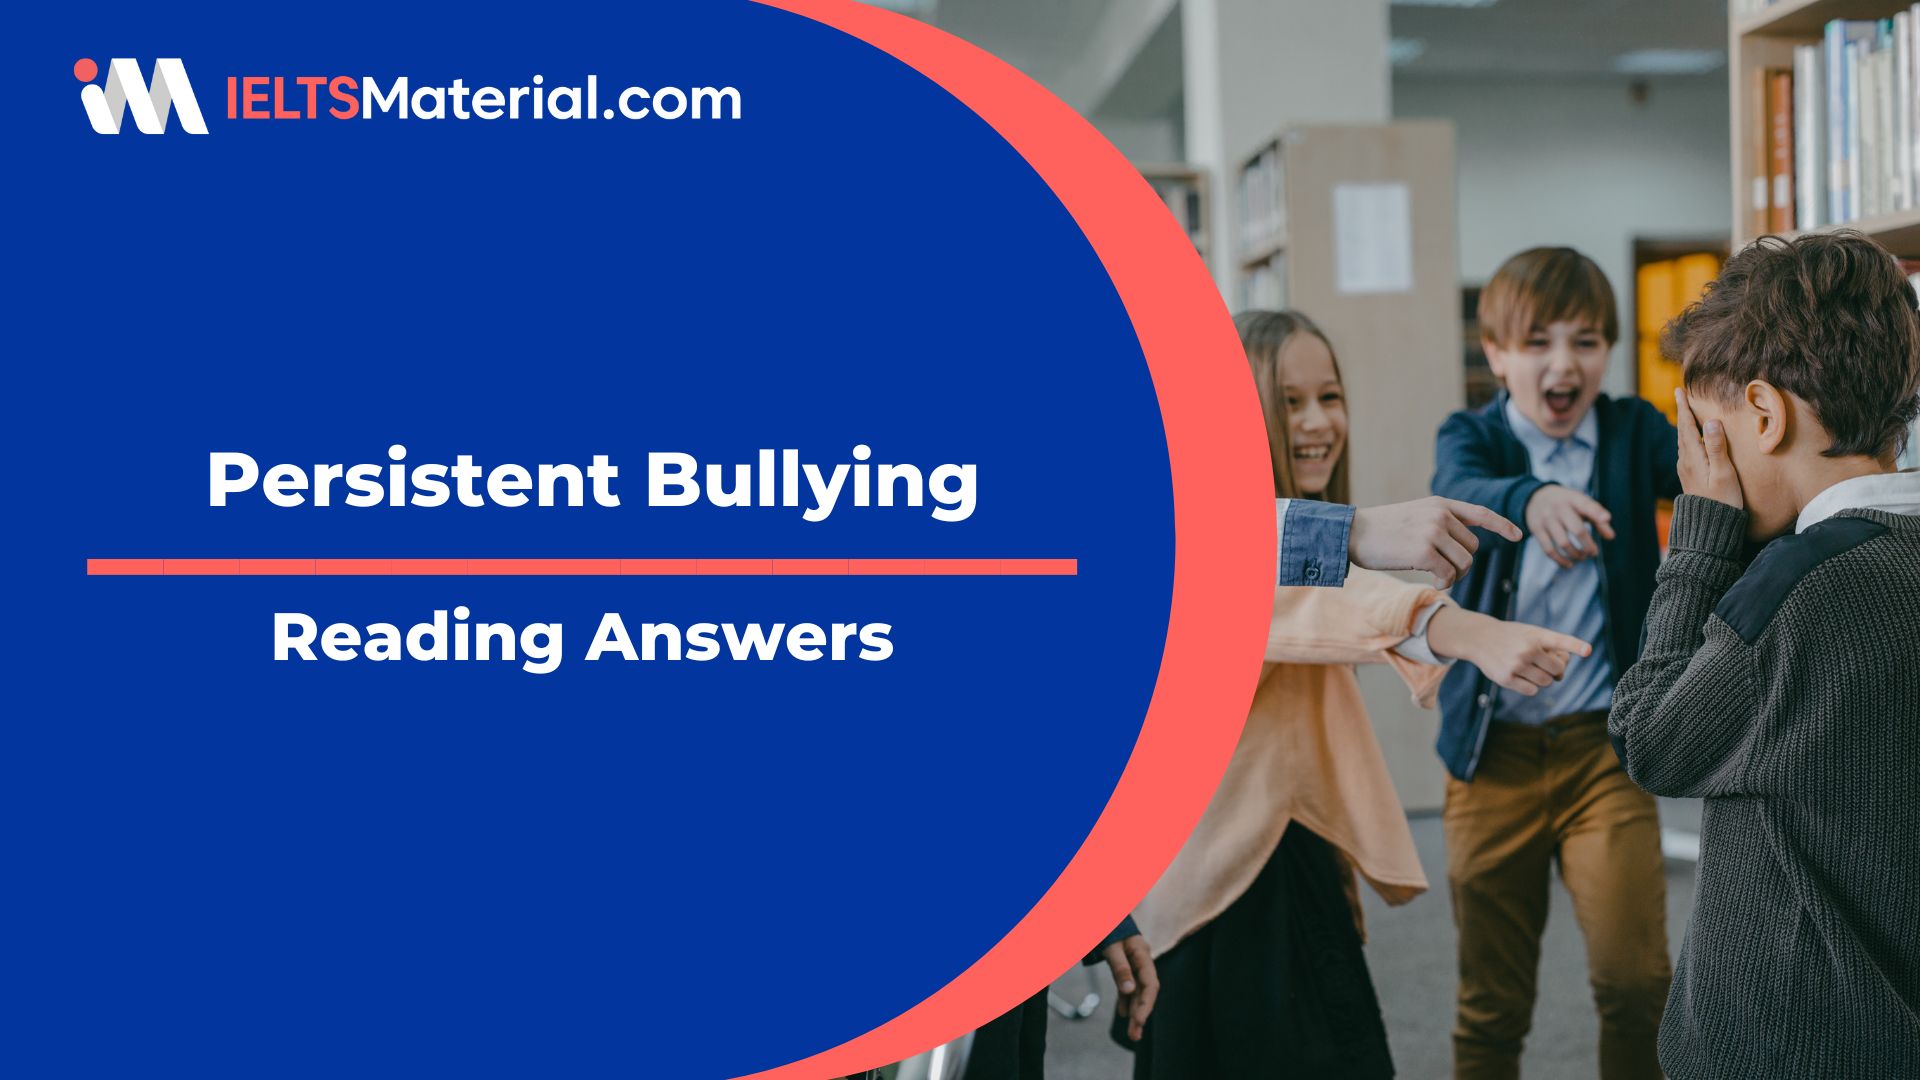 Persistent Bullying Reading Answers